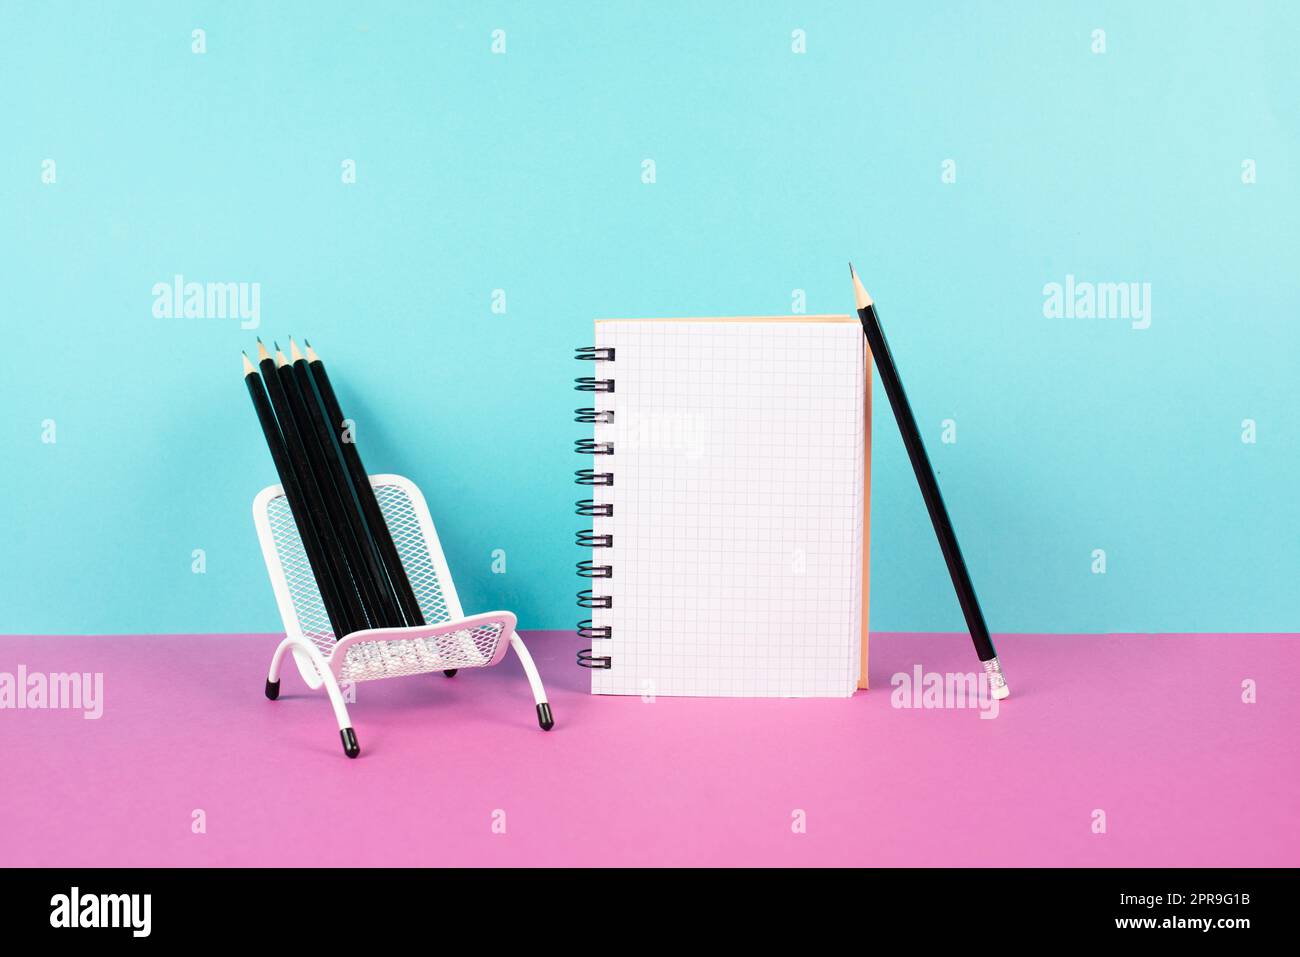 Empty notebook with pencils in a chair, being creative and brainstorming for new ideas, writing a message, workspace, pink and turquoise colored background Stock Photo